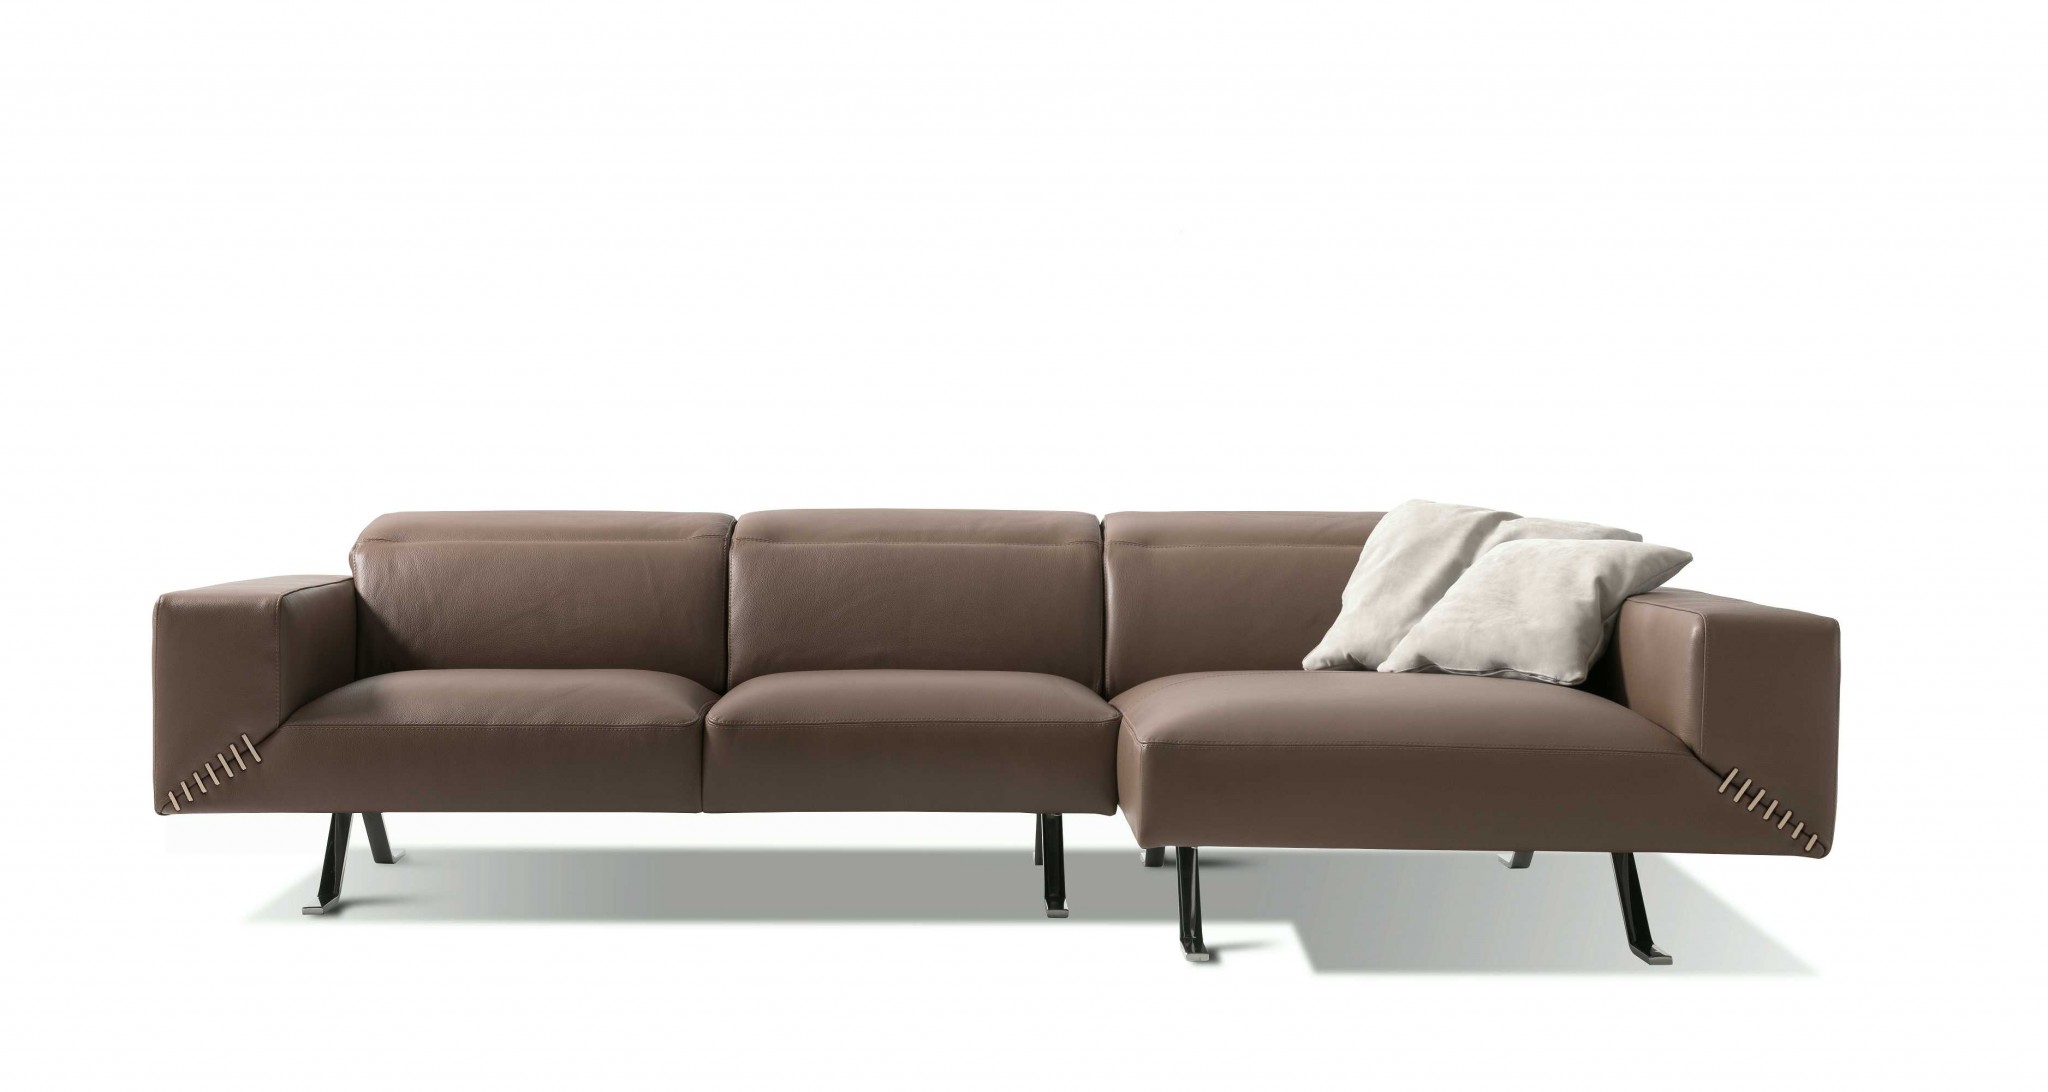 116" X 63" X 29" Taupe Leather Sectional & Chaise